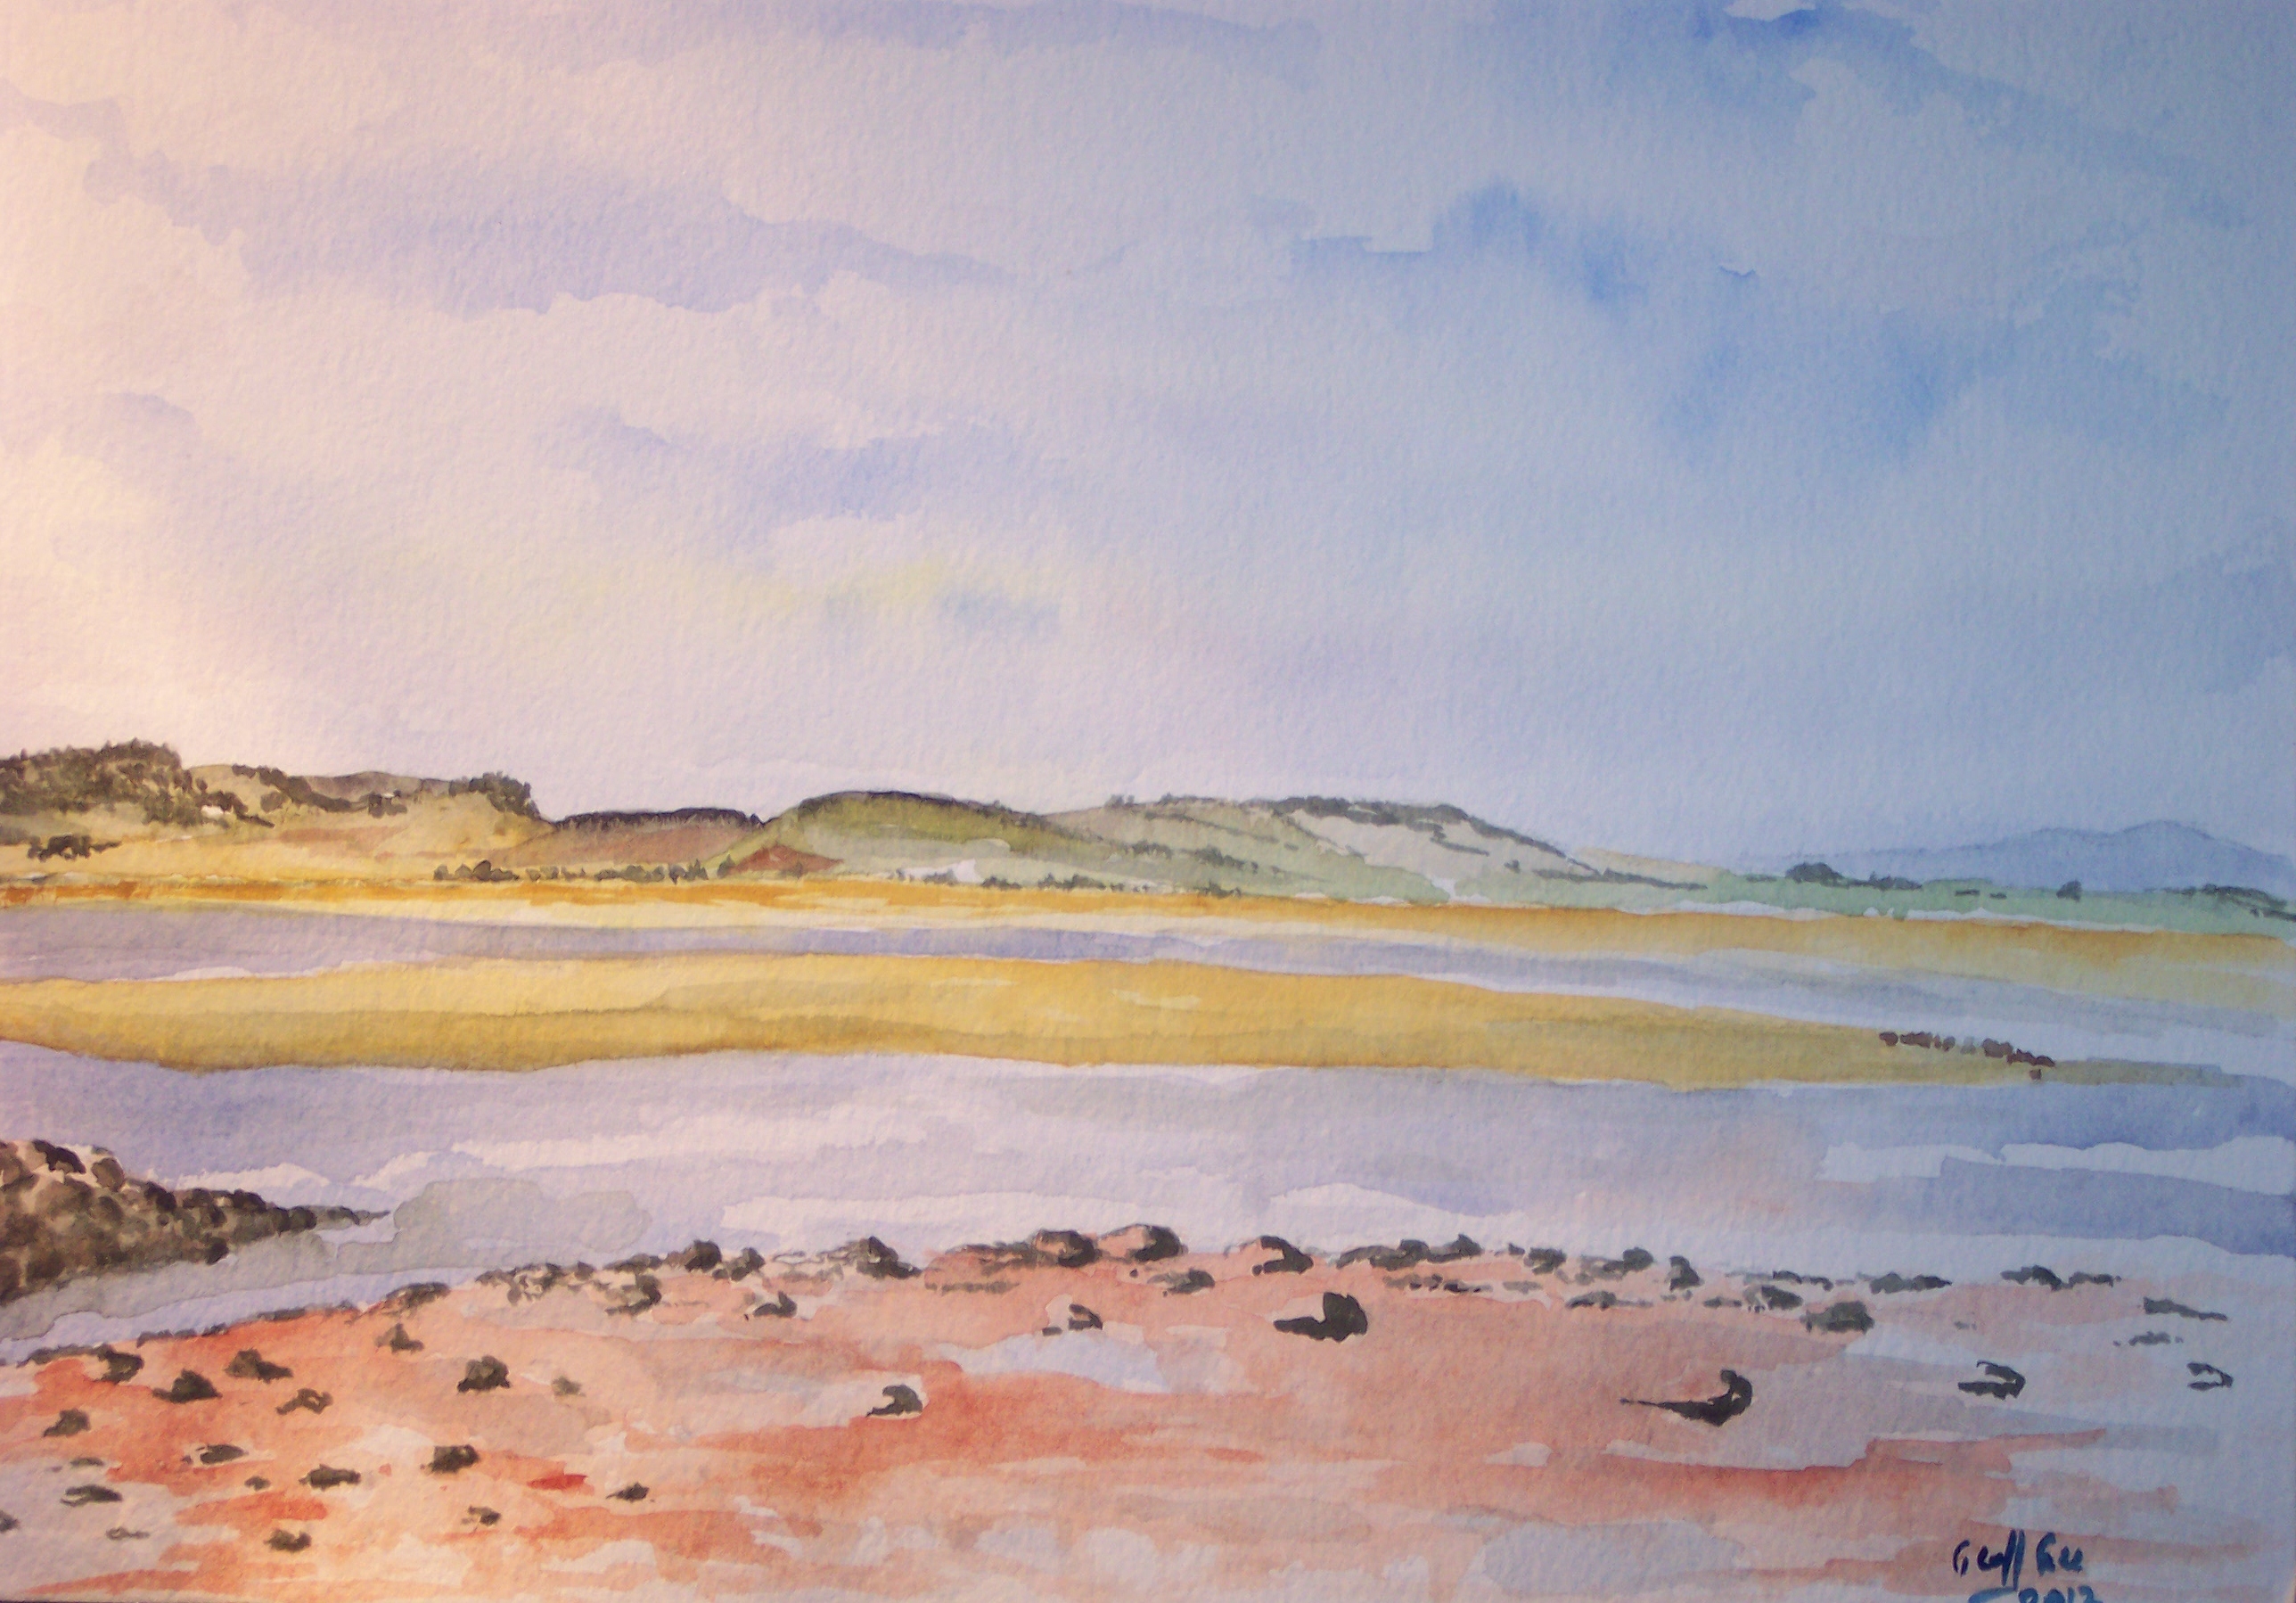 Watercolour  Unframed  Picture size - 14"x10"  Price - £25